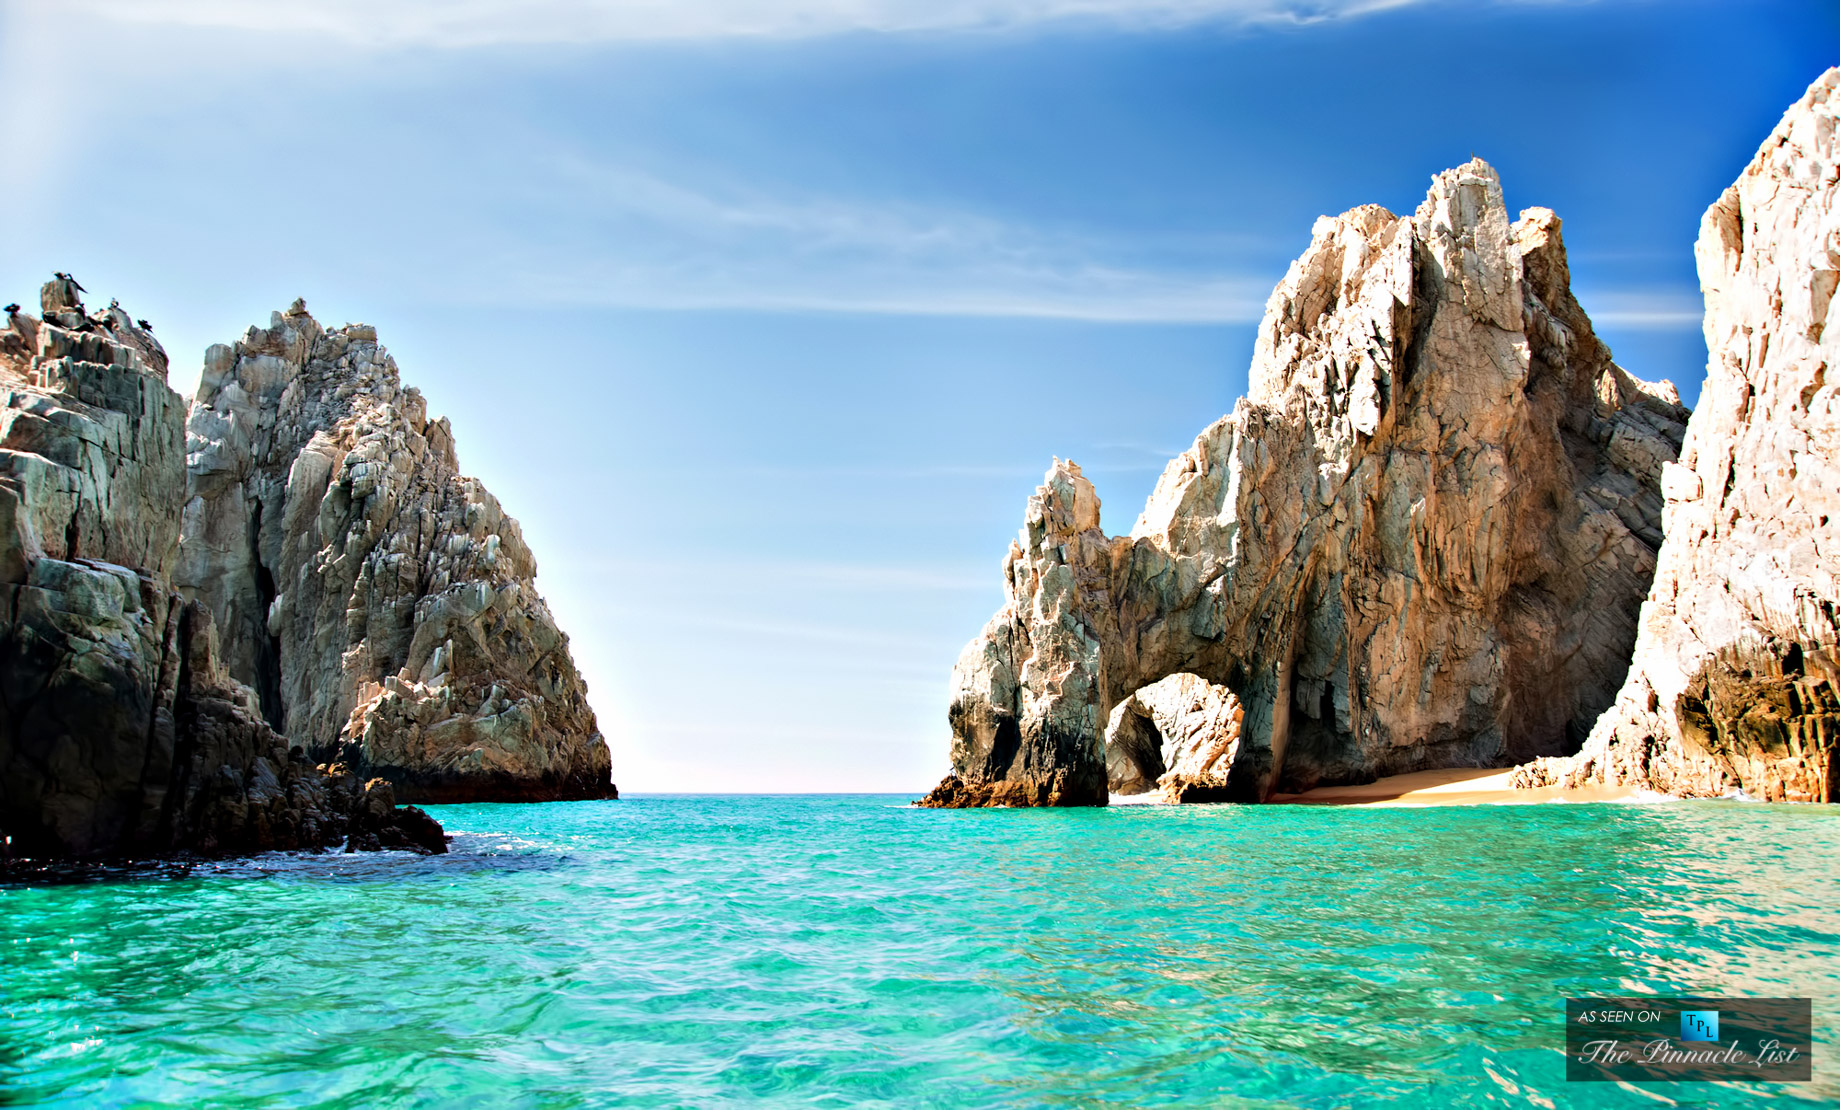 Picturesque El Arco Rock is the Most Famous Landmark of Cabo San Lucas in Mexico